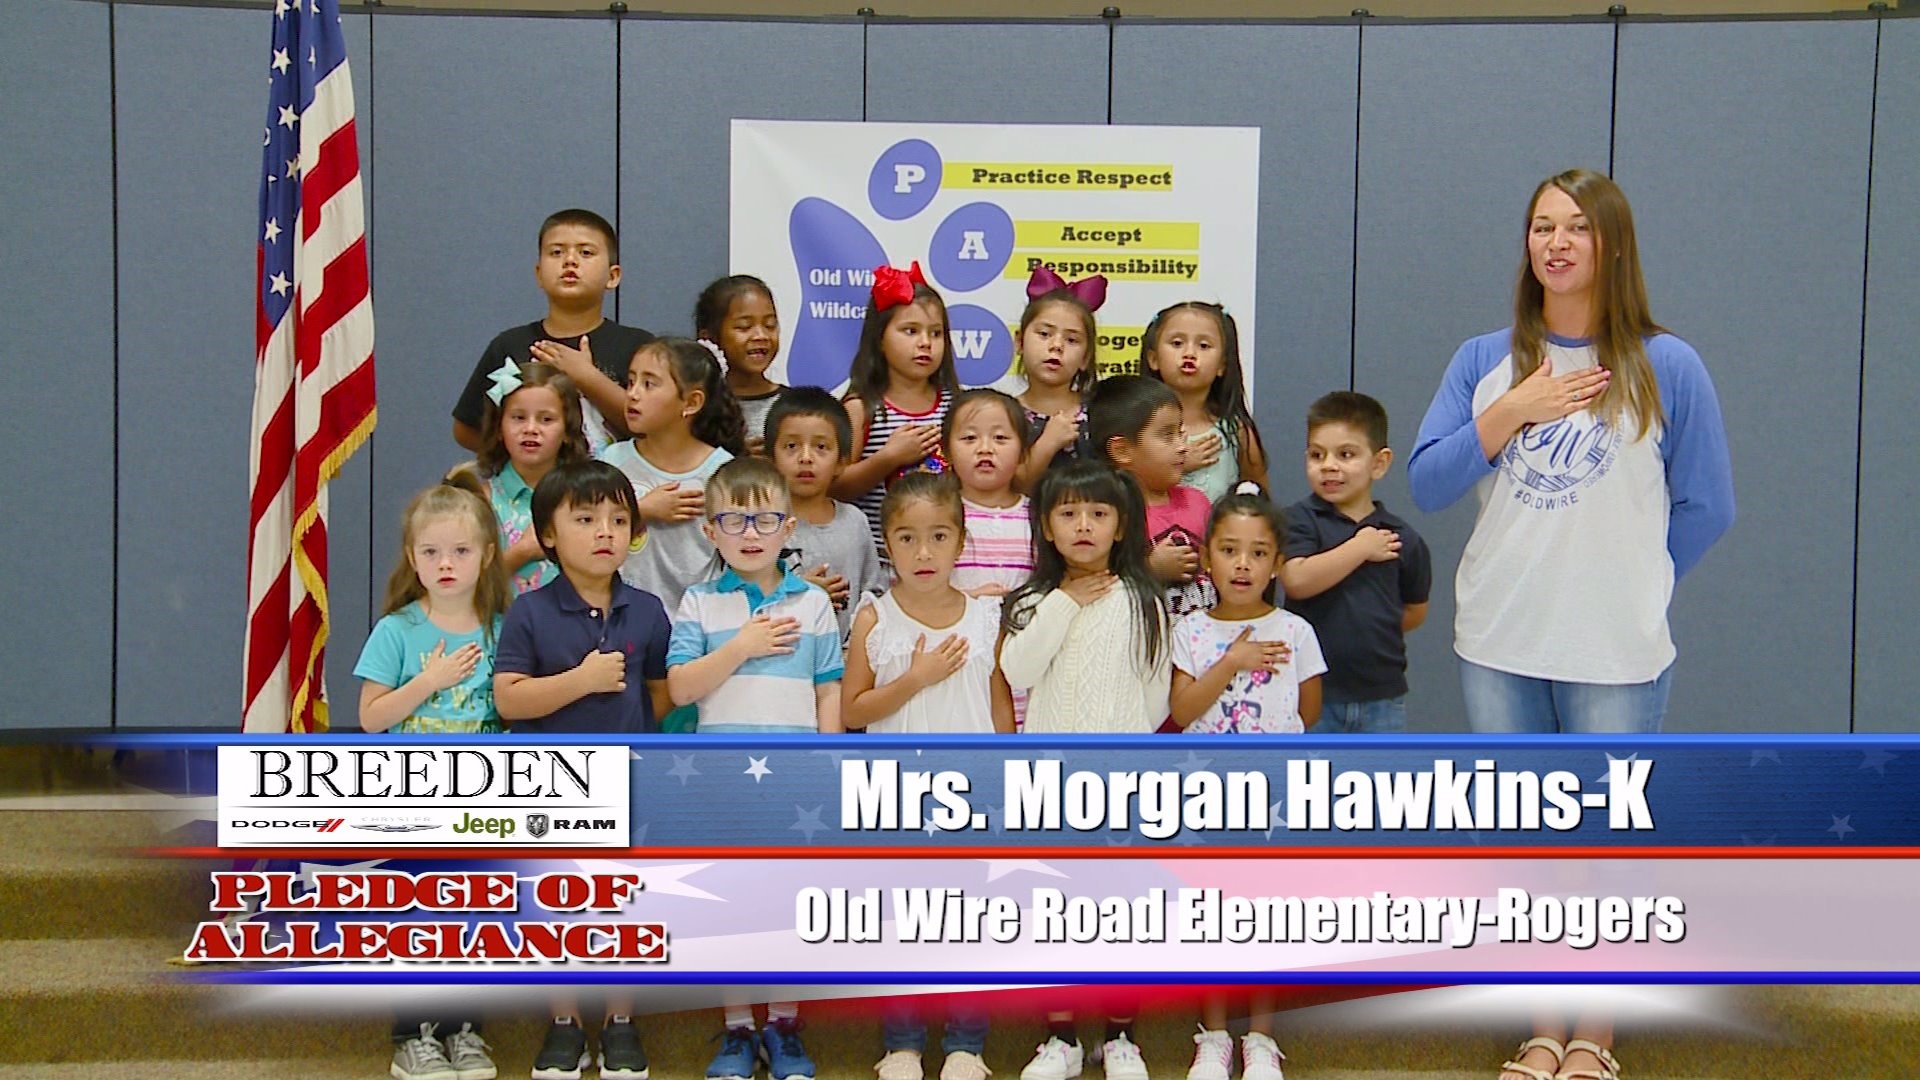 Mrs. Morgan Hawkins -K at Old Wire Road Elementary, Rogers